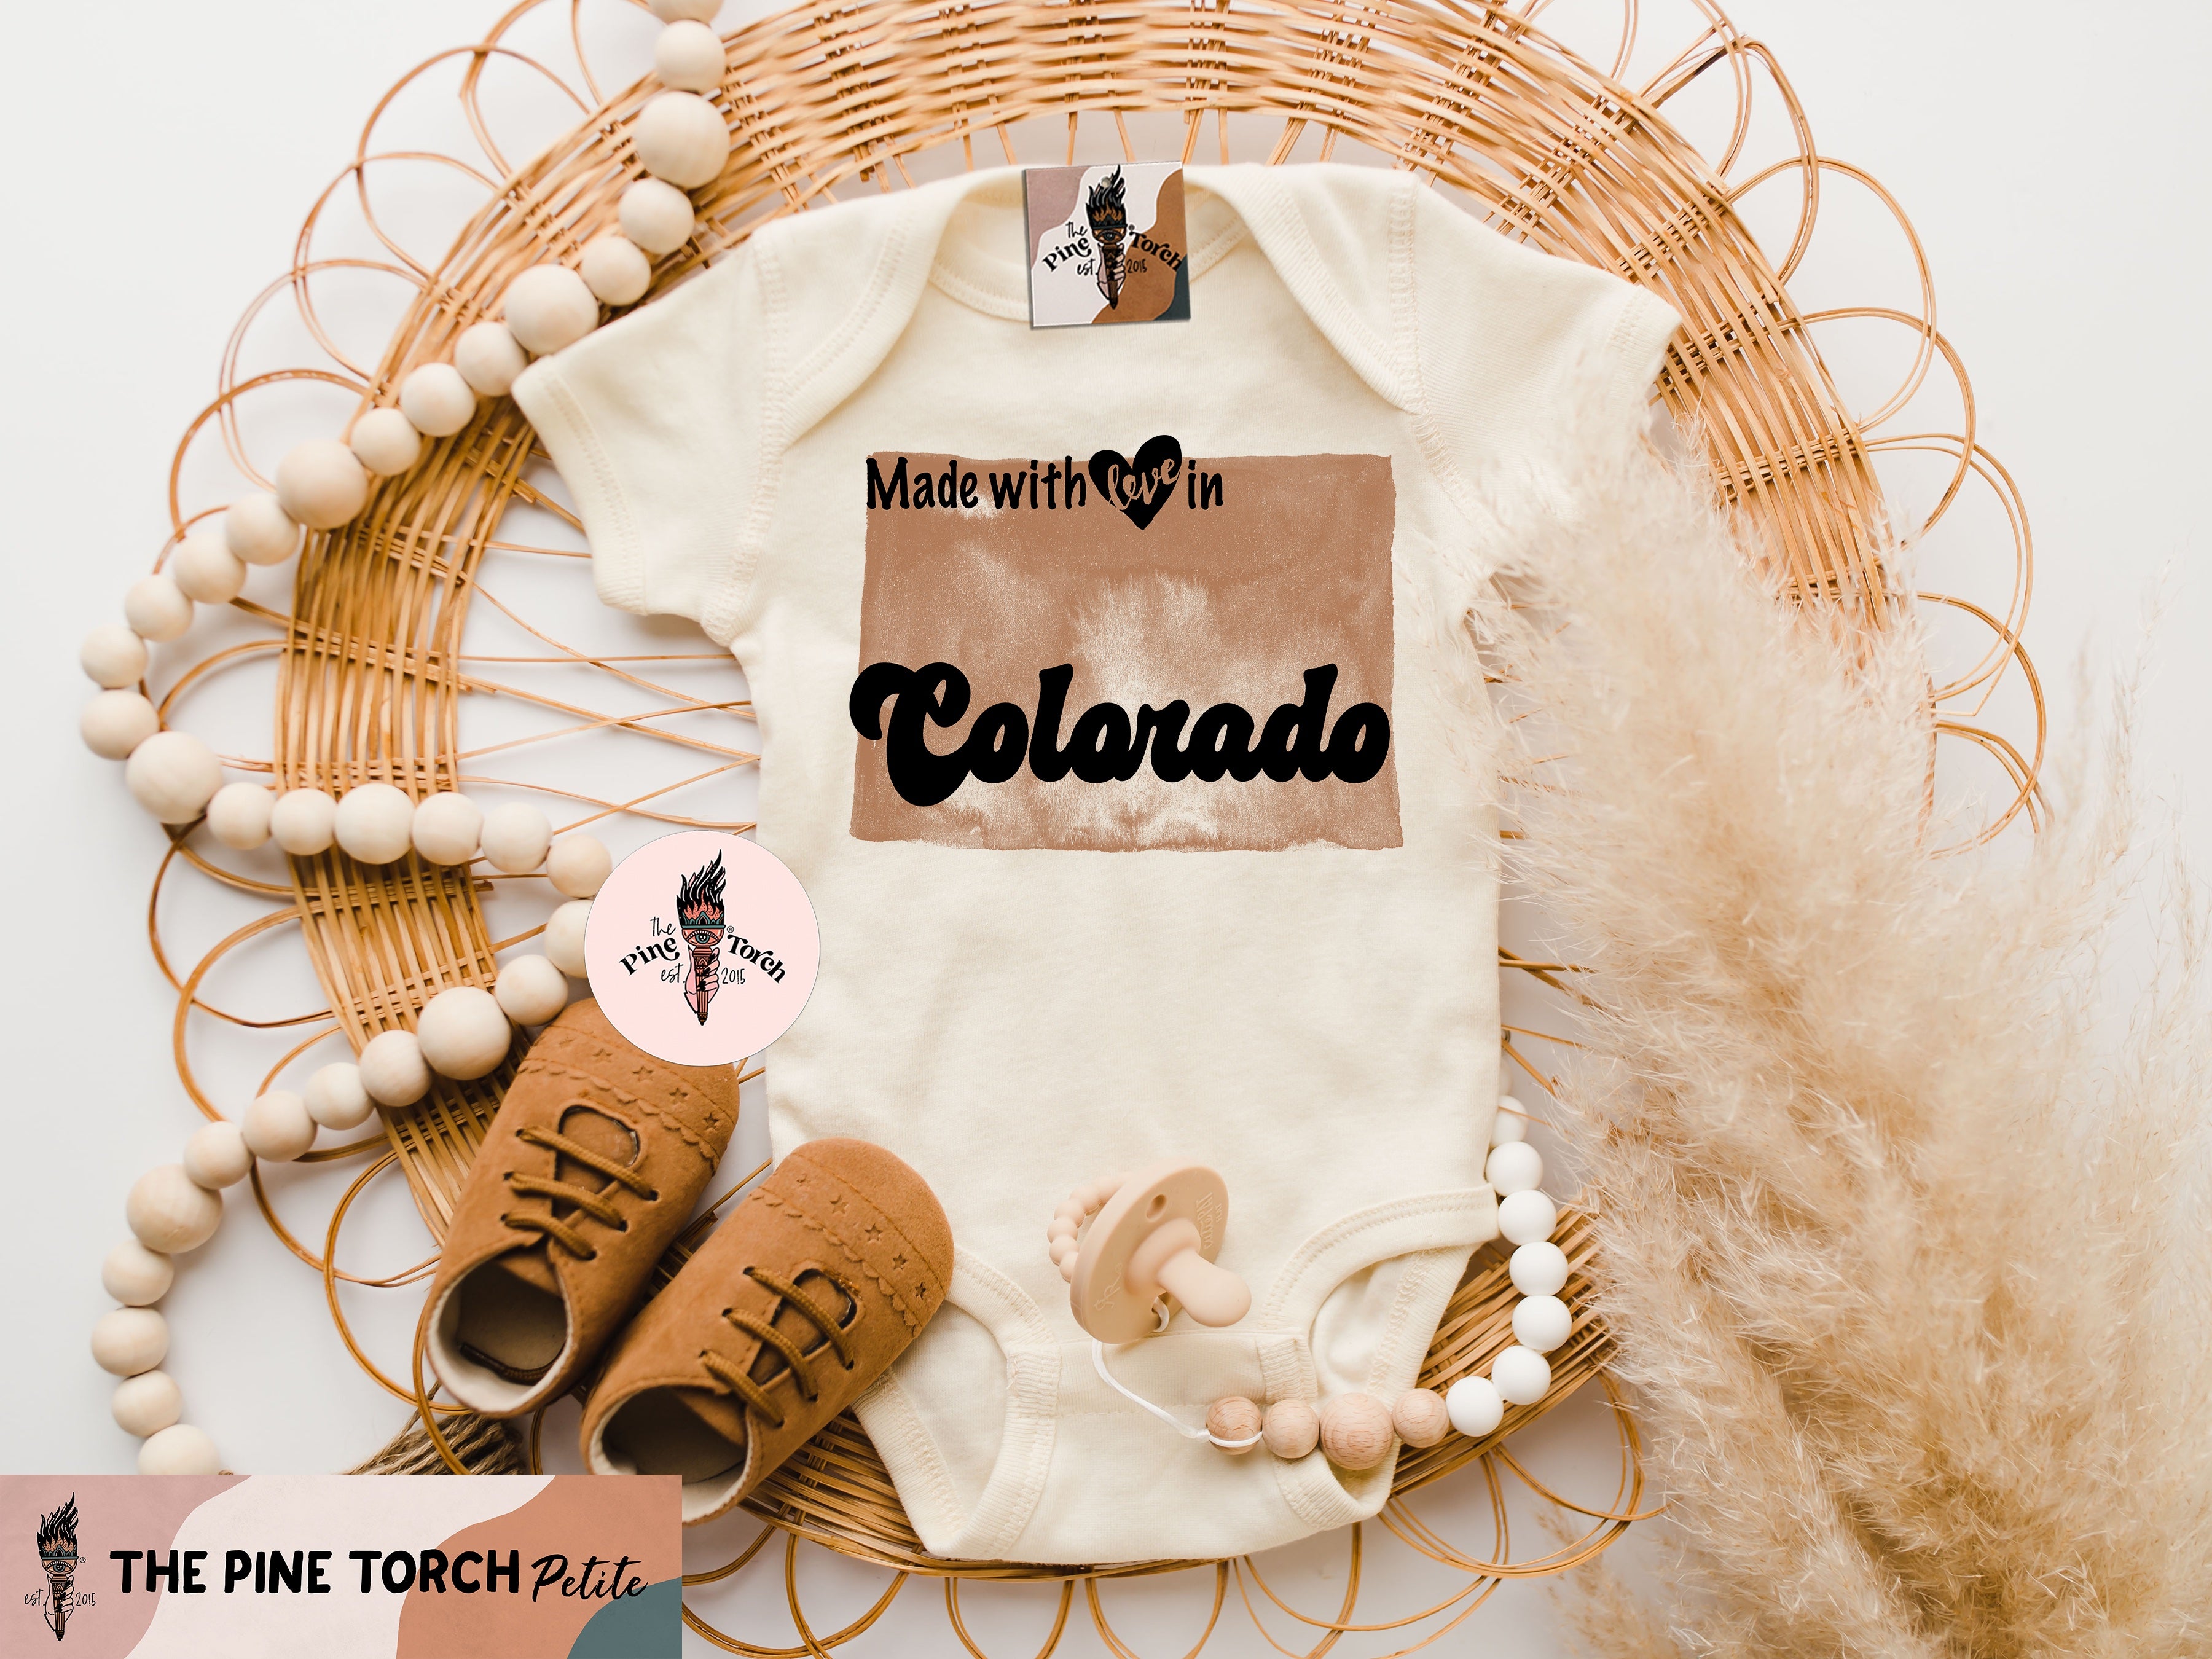 « MADE WITH LOVE IN COLORADO » BODYSUIT